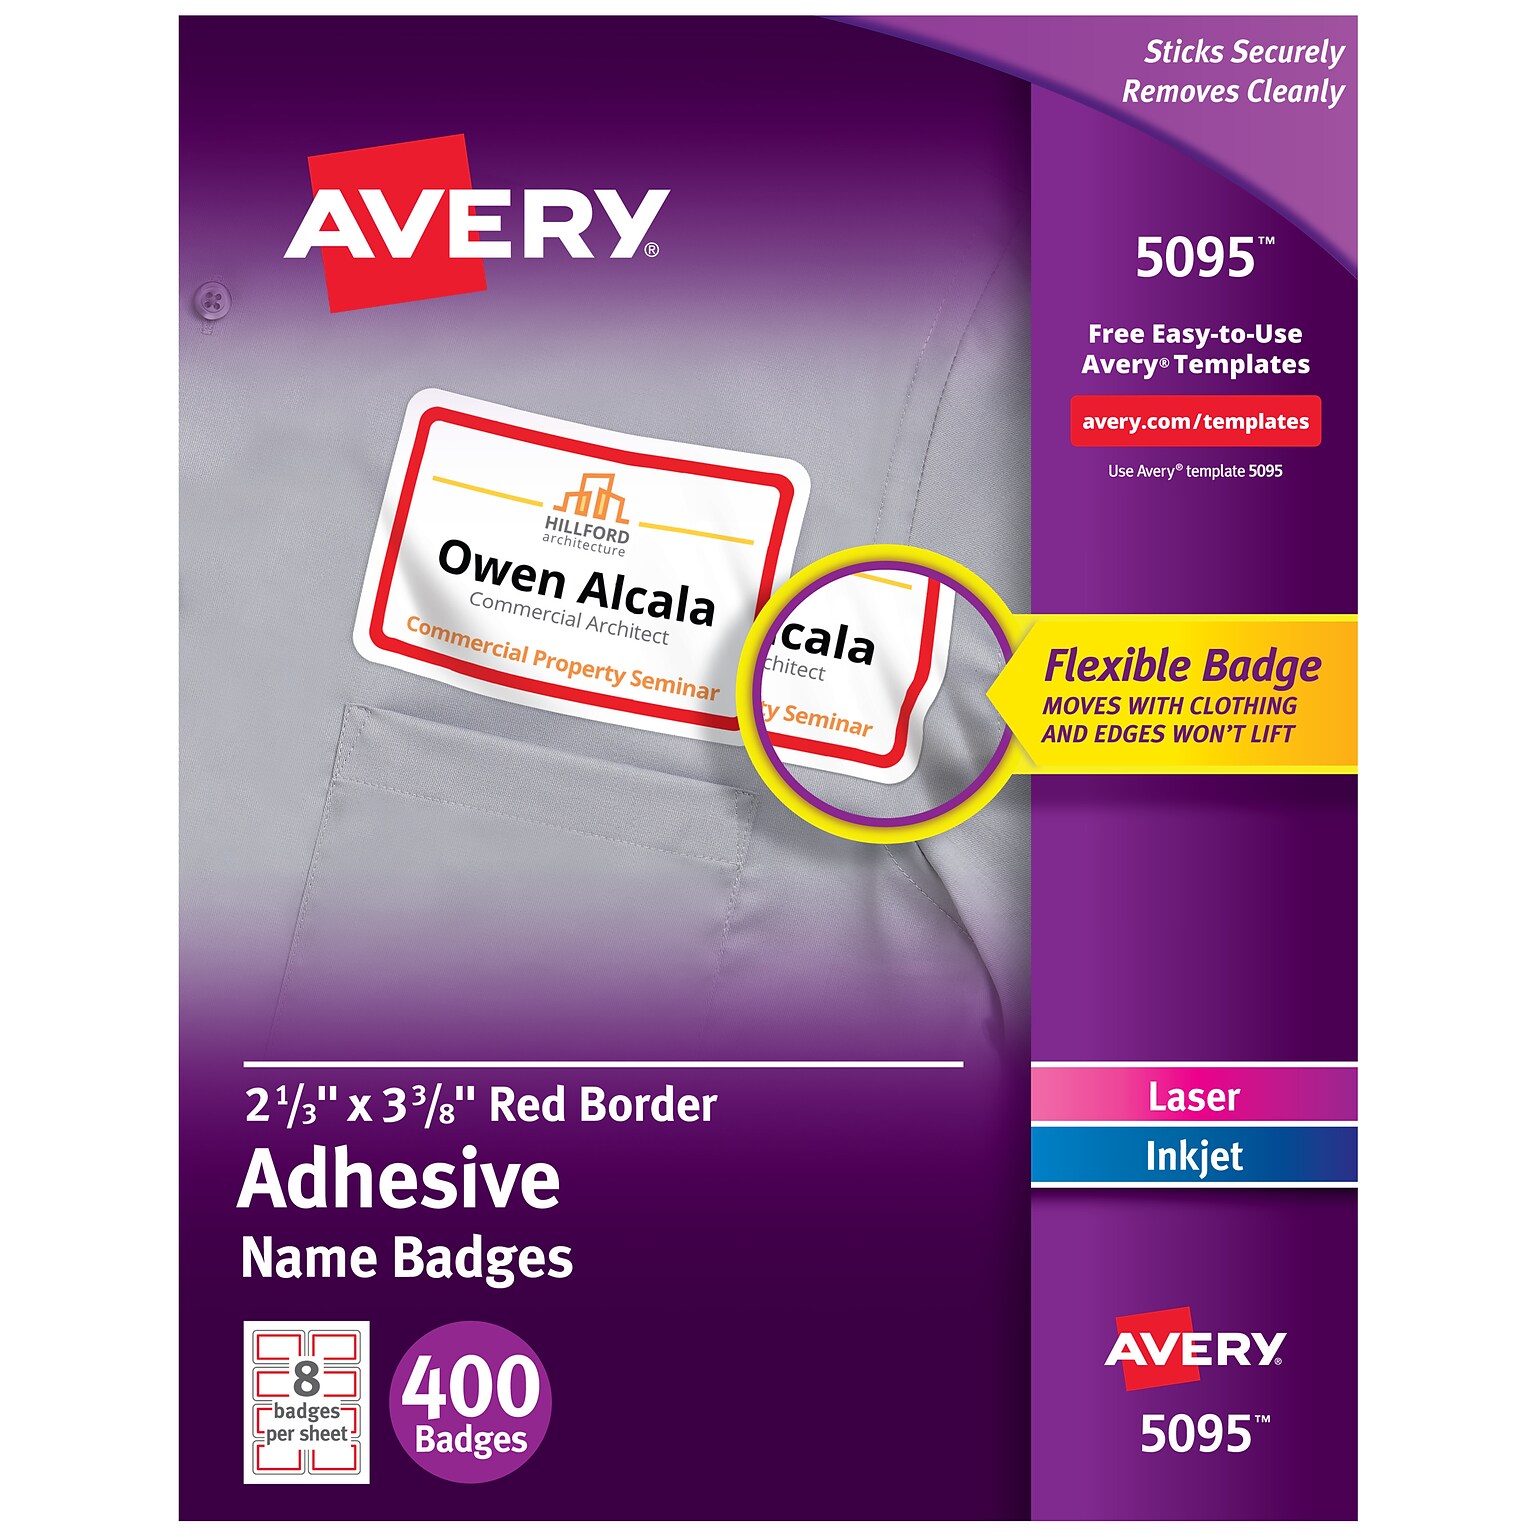 Avery Flexible Laser/Inkjet Name Badge Labels, 2 1/3 x 3 3/8, White with Red Border, 400 Labels Per Pack (5095)